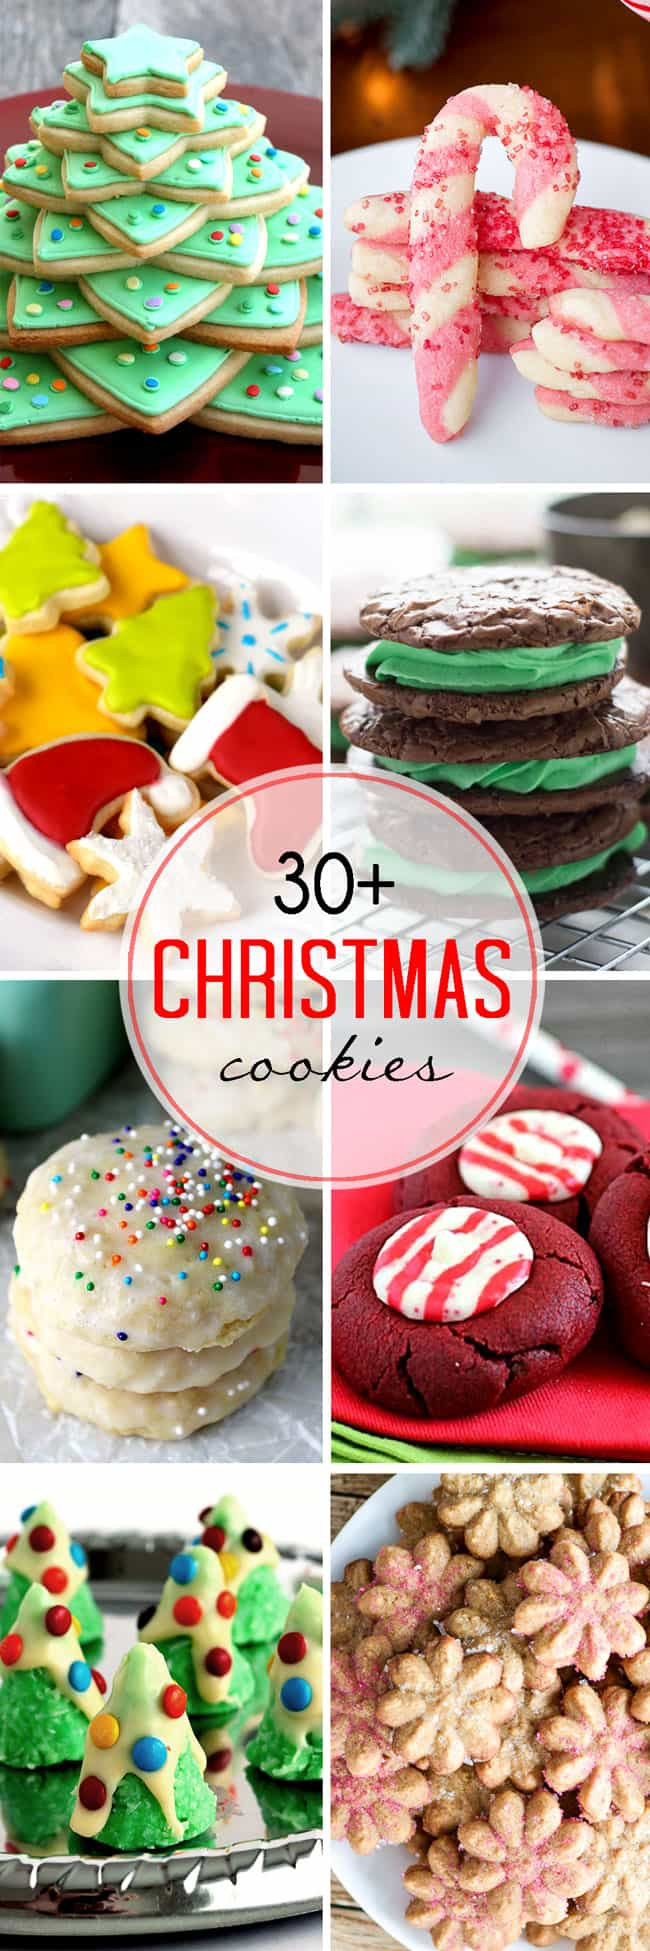 Christmas Baking Gifts
 30 Christmas Cookies for your holiday baking